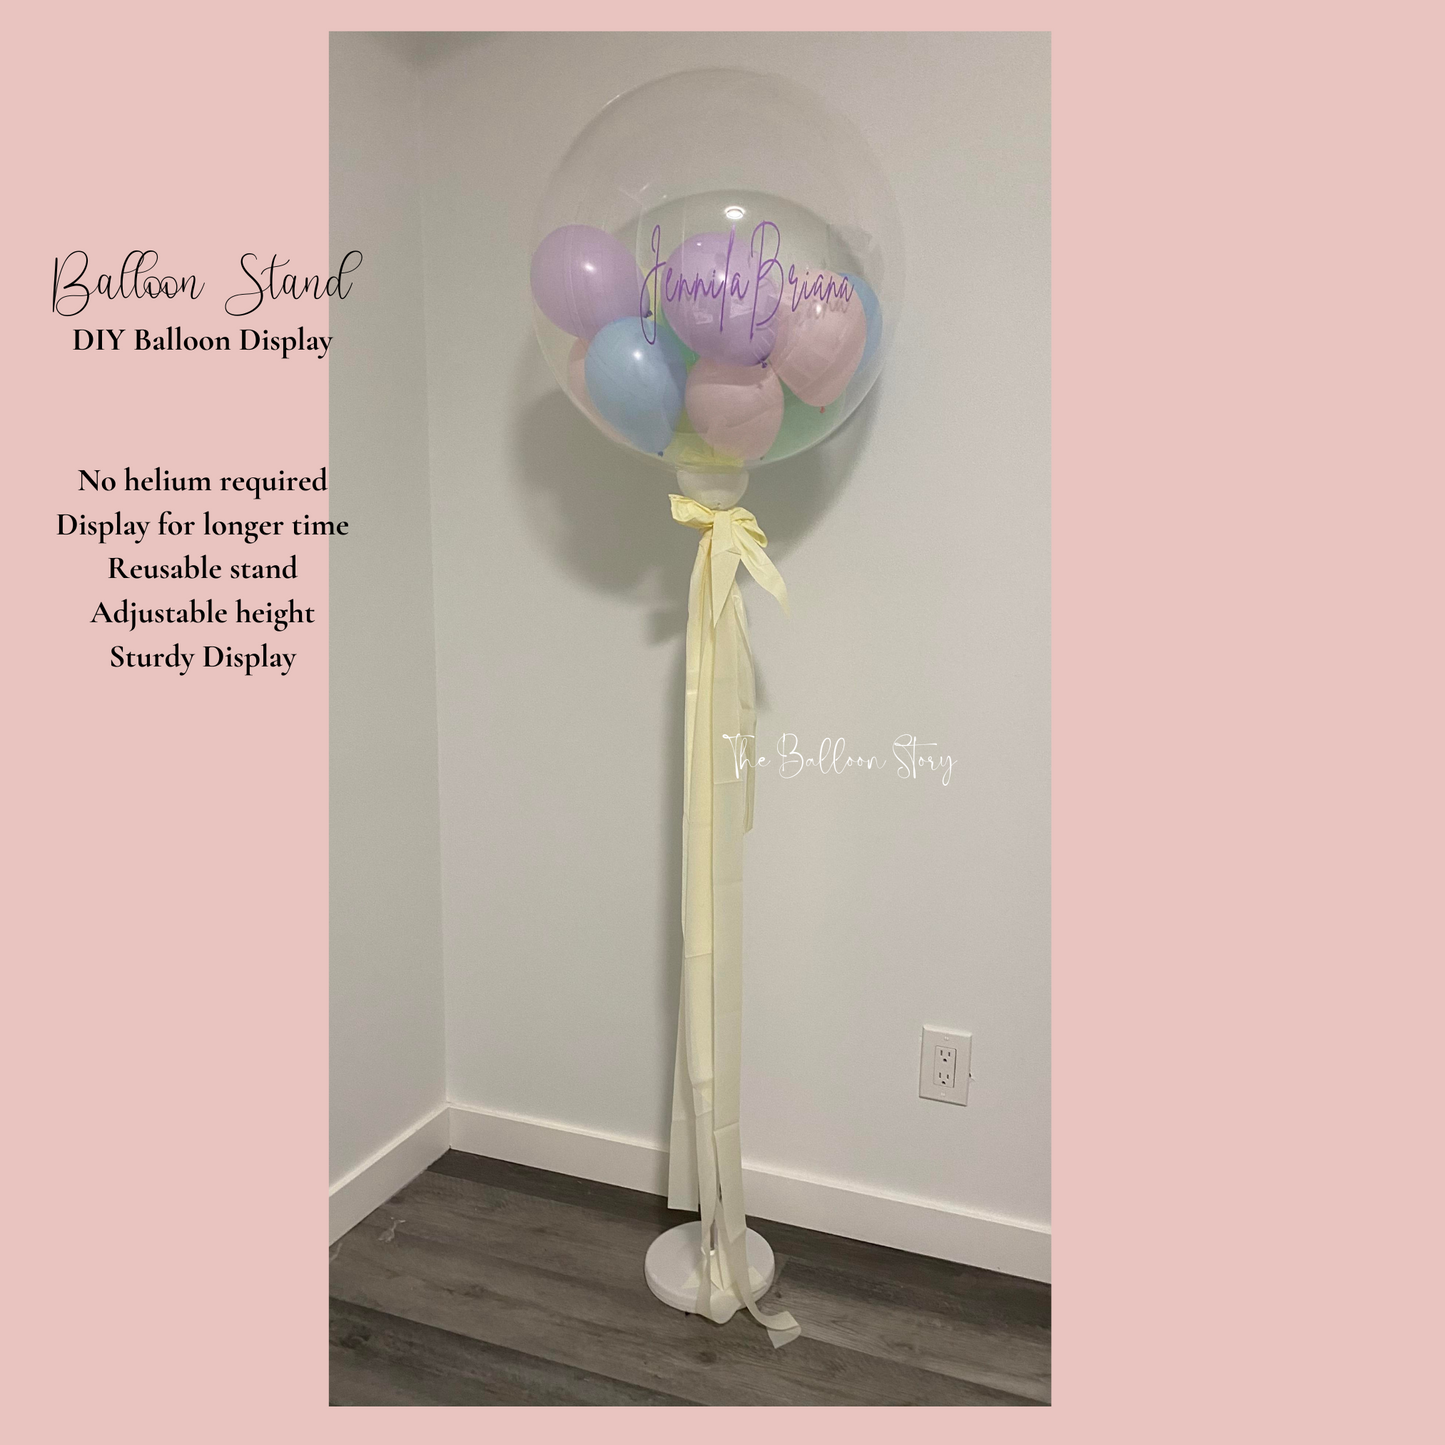 Adjustable Balloon Stand for a No Helium Balloon Display DIY Balloon Column Stand Balloon Pillar Stand